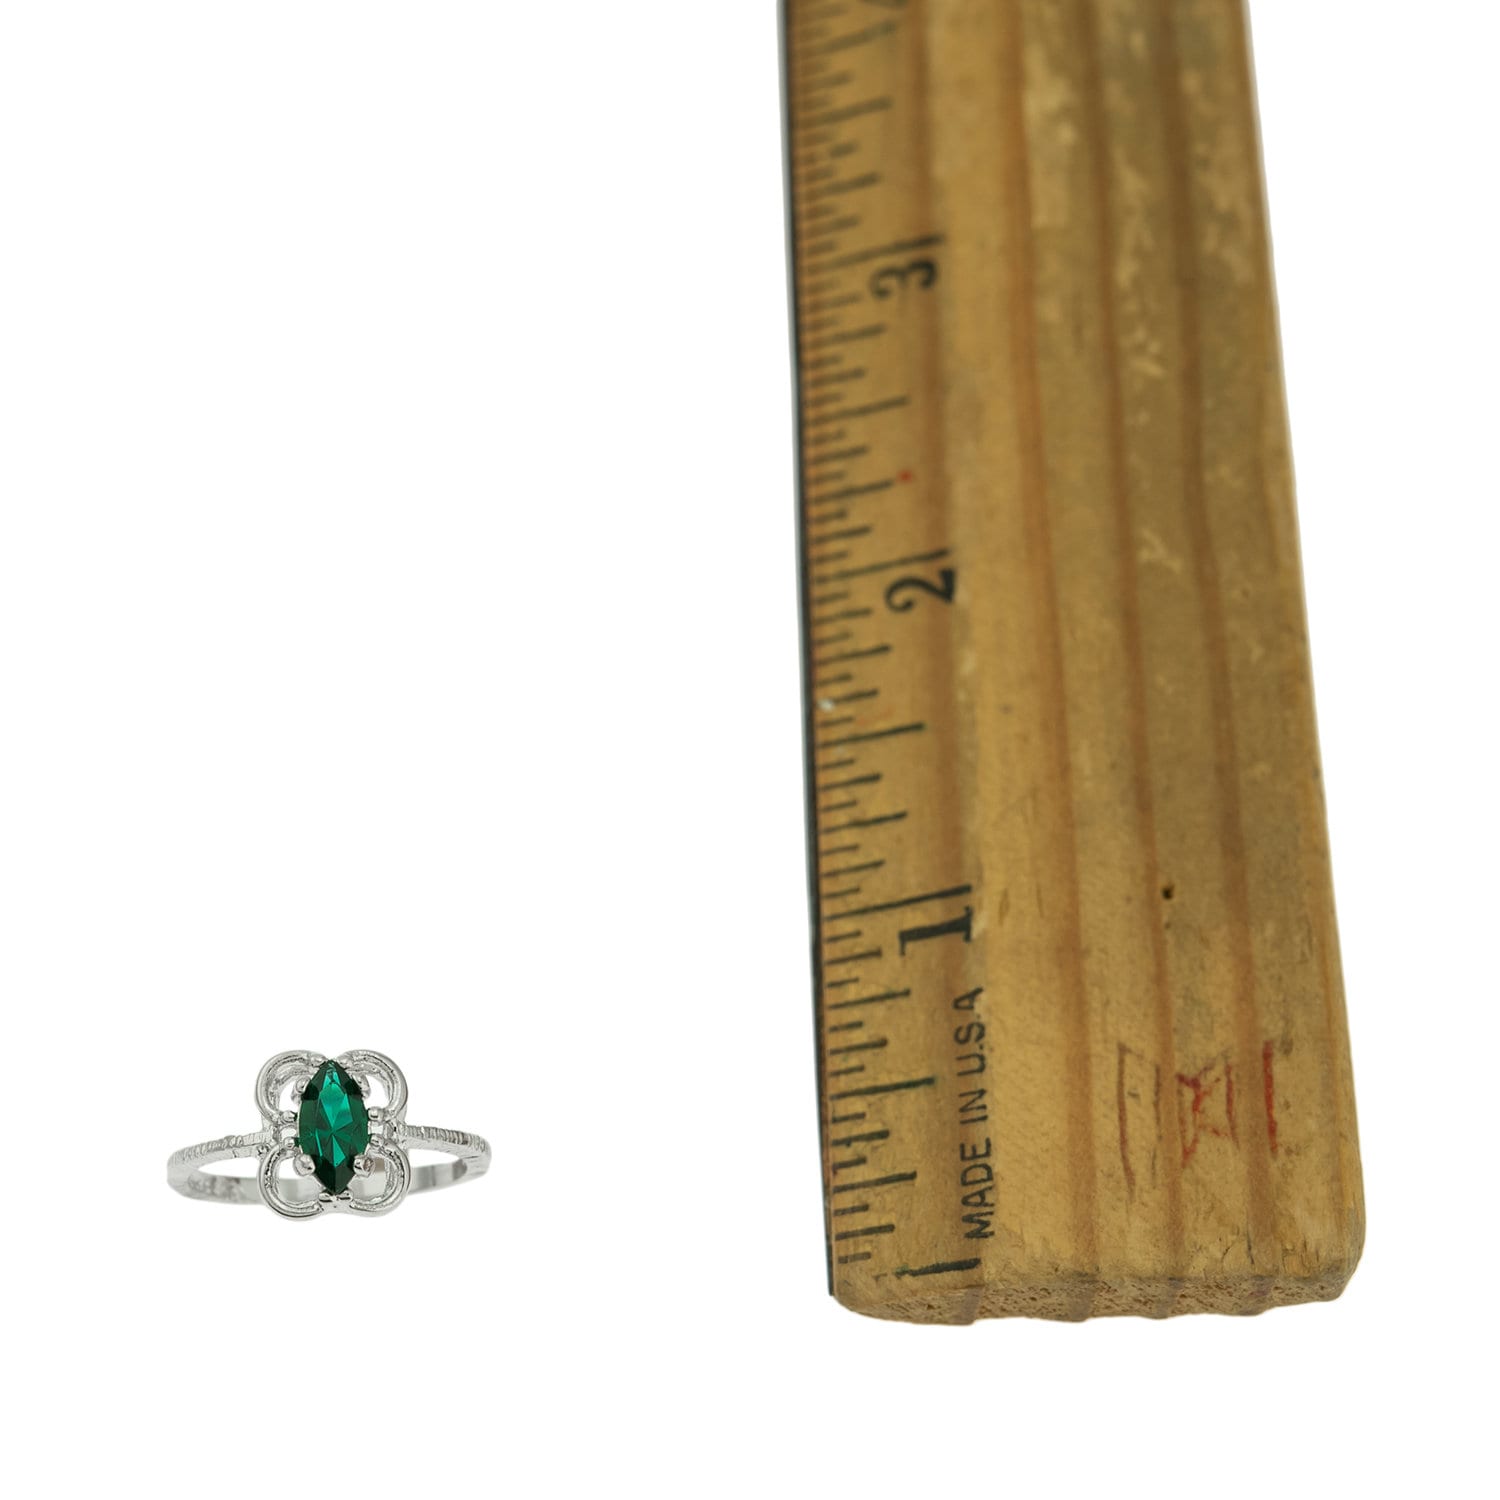 Vintage Ring Emerald Austrian Crystal Ring 18k White Gold Silver Made in the USA R586 - Limited Stock - Never Worn